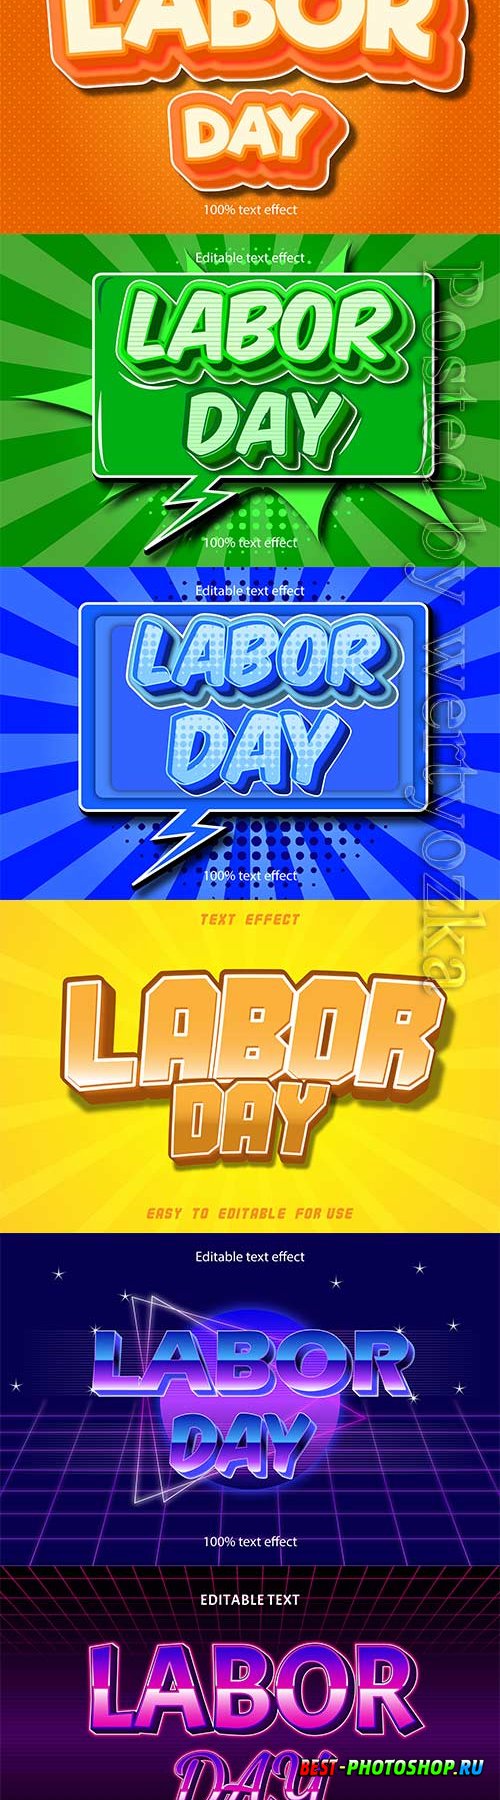 Labor day editable text effect vol 7